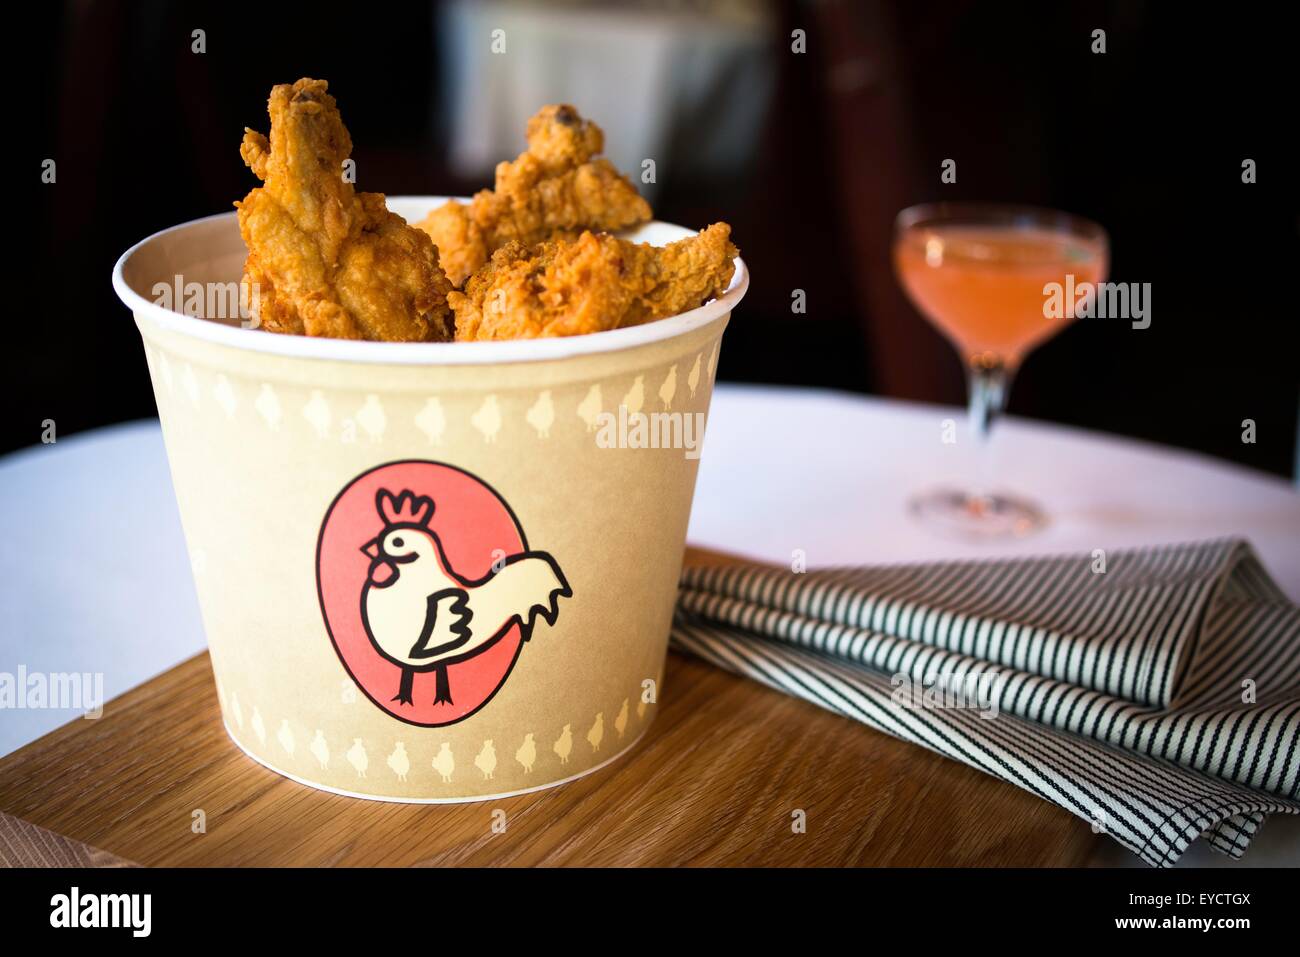 Bucket of fried chicken on restaurant table Stock Photo